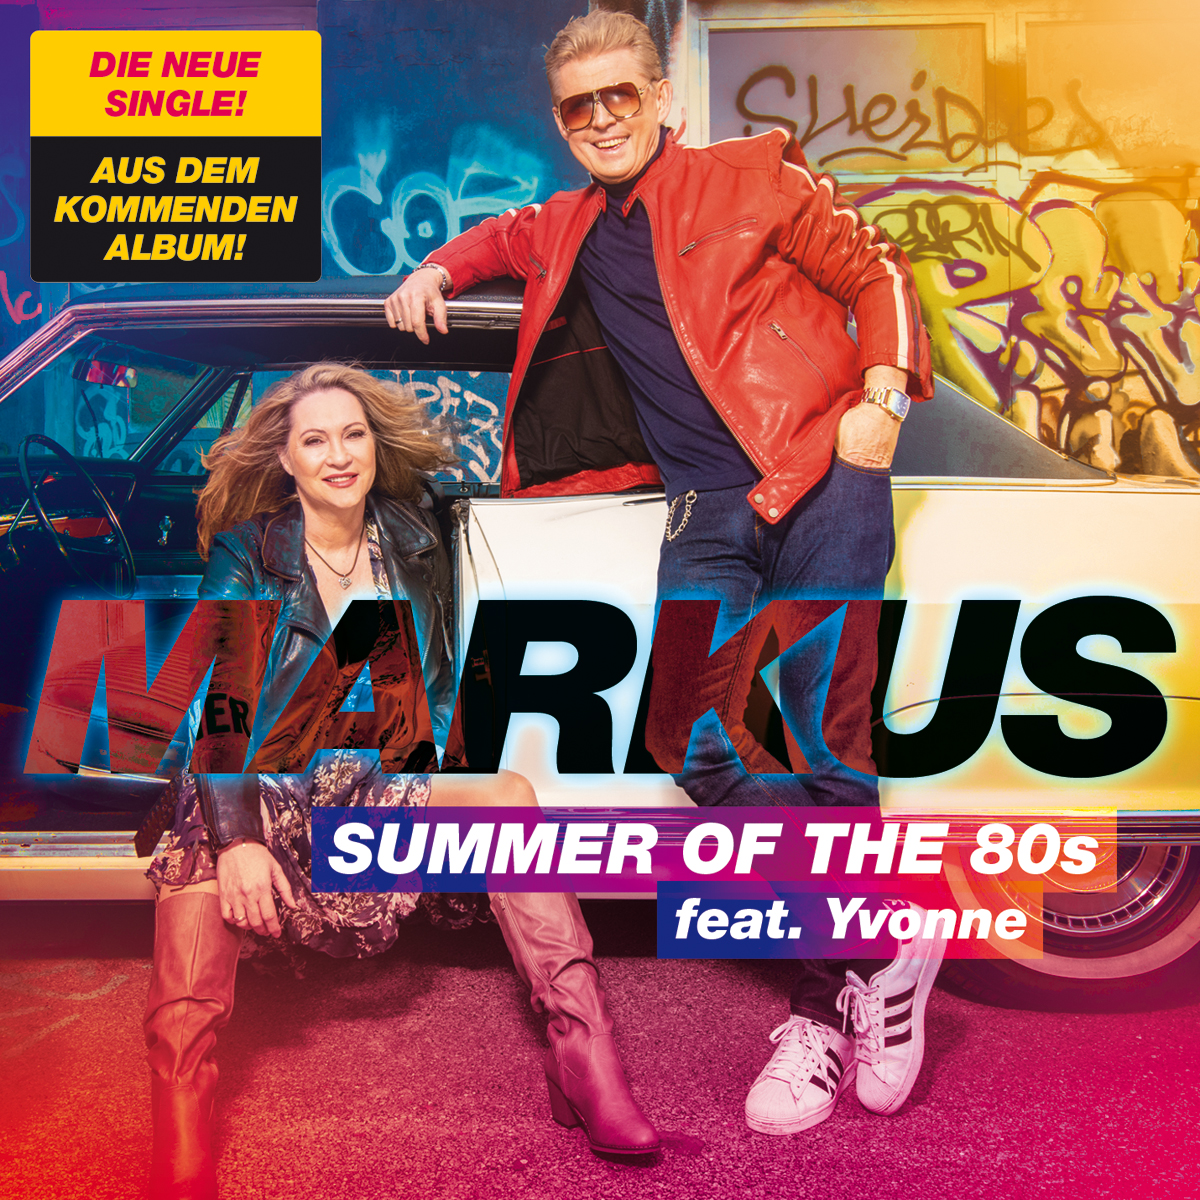 Markus feat. Yvonne - Summer of the 80s (2022) 